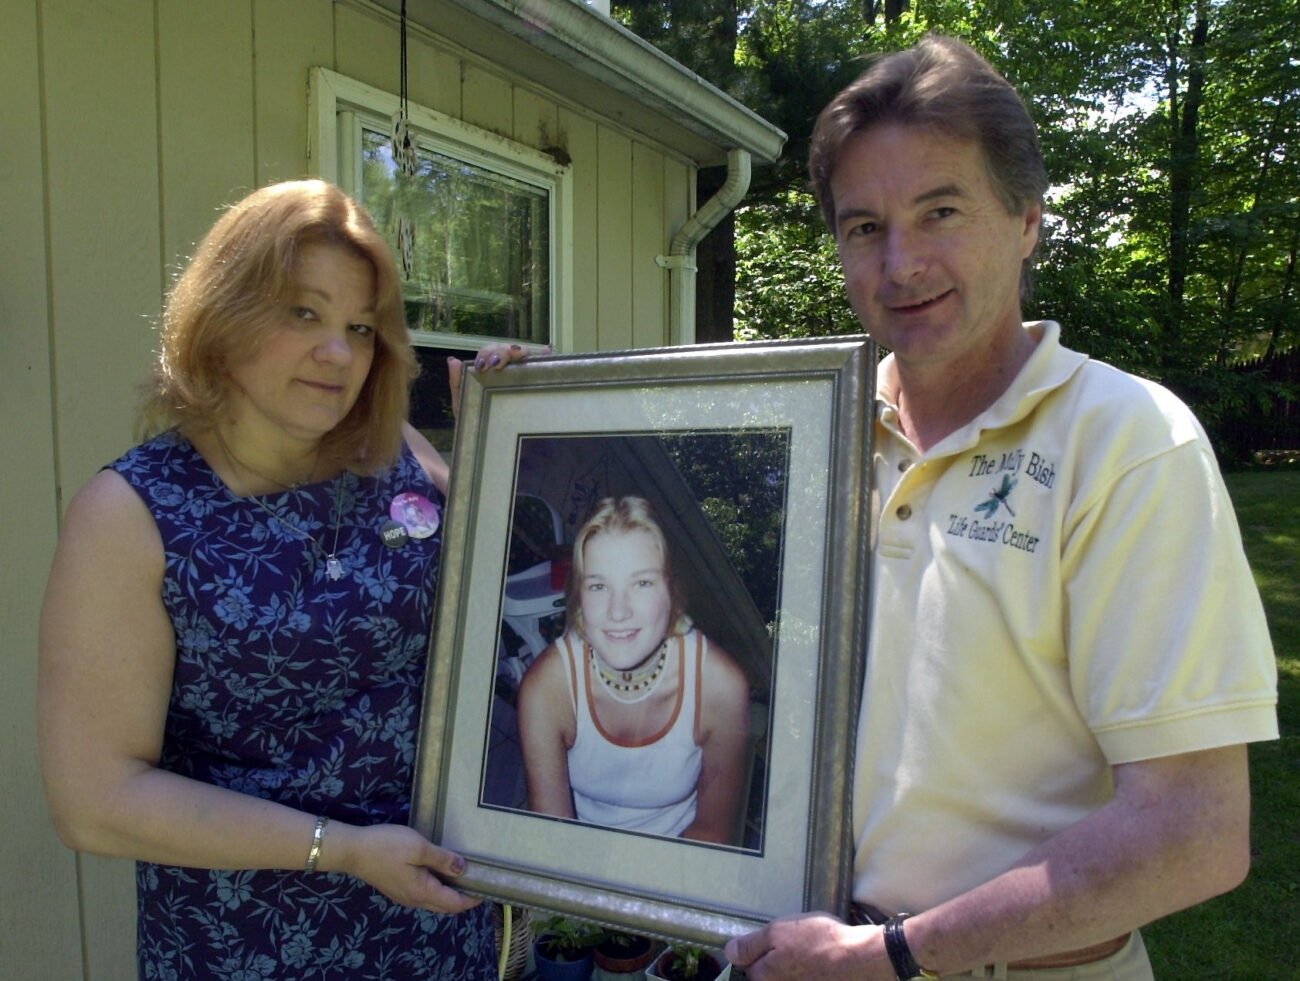 2021 is the 20th anniversary of the disappearance of sixteen-year-old Molly Bish. Will this cold case ever get solved?